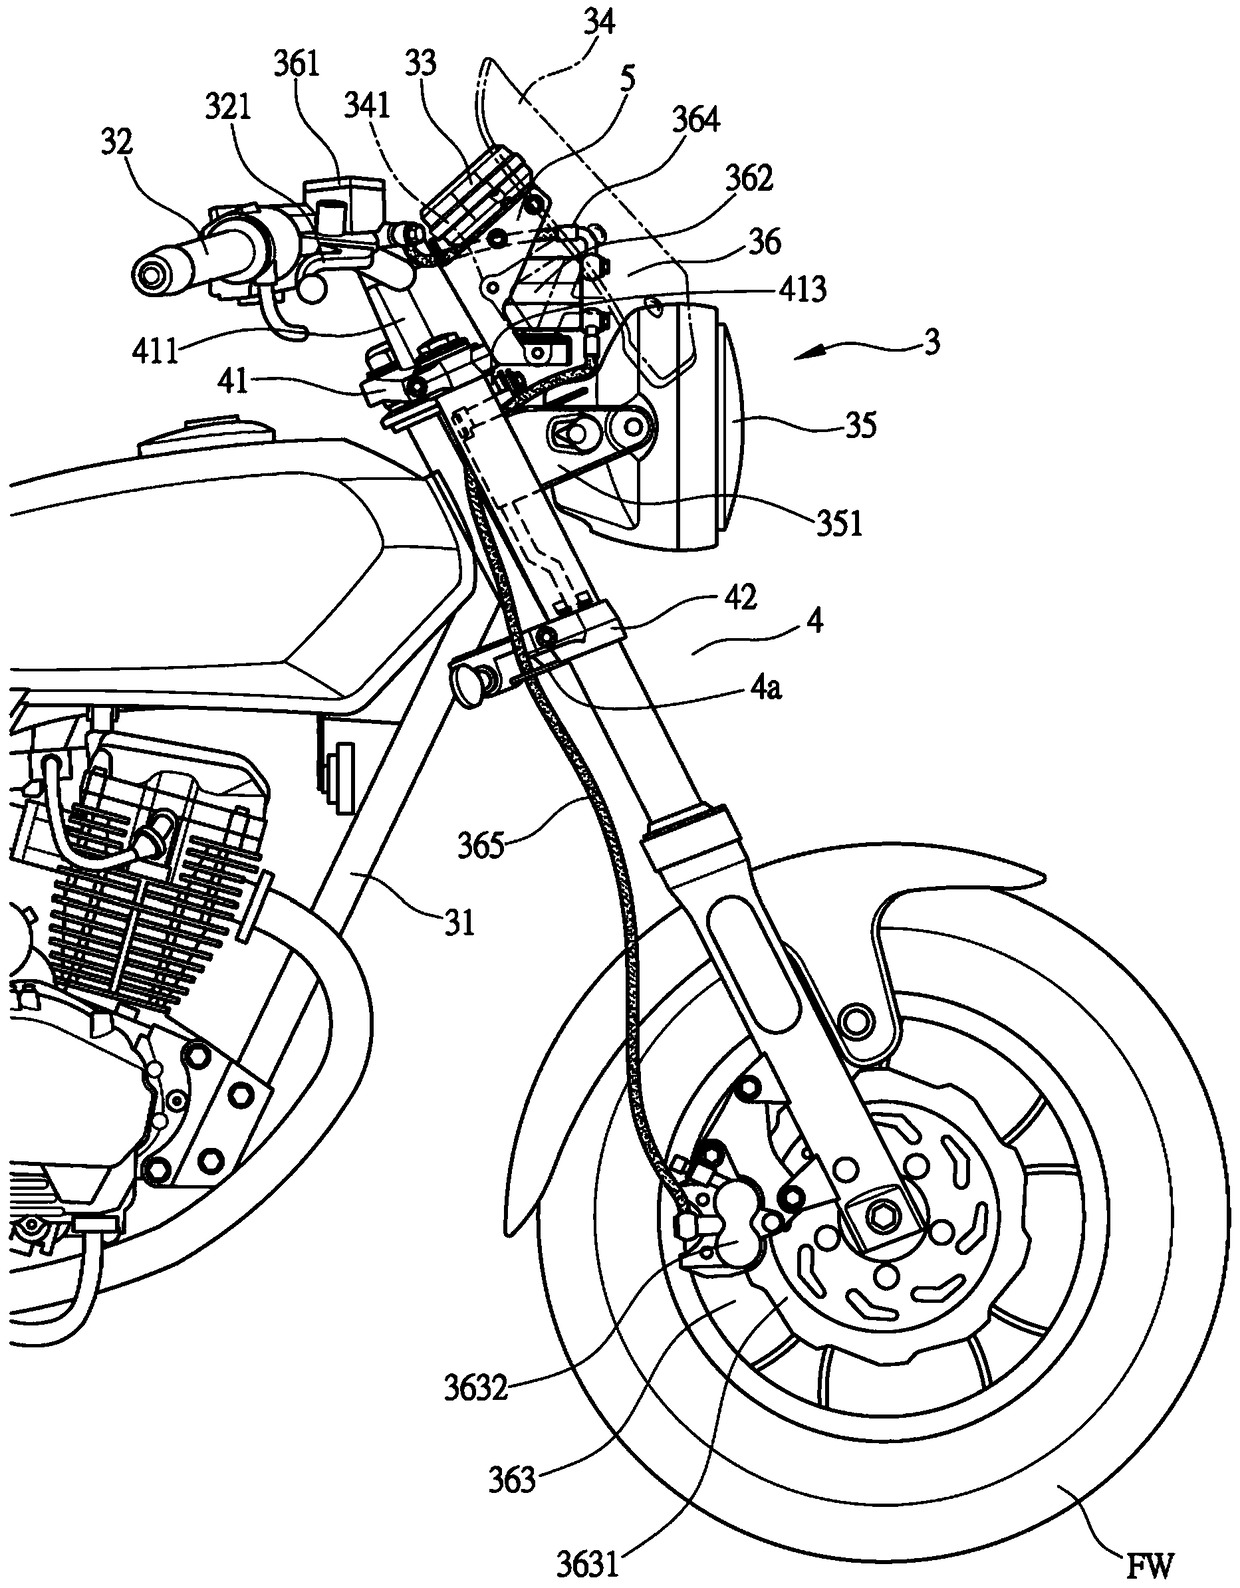 Control Unit Structure of Motorcycle Anti-skid Braking System